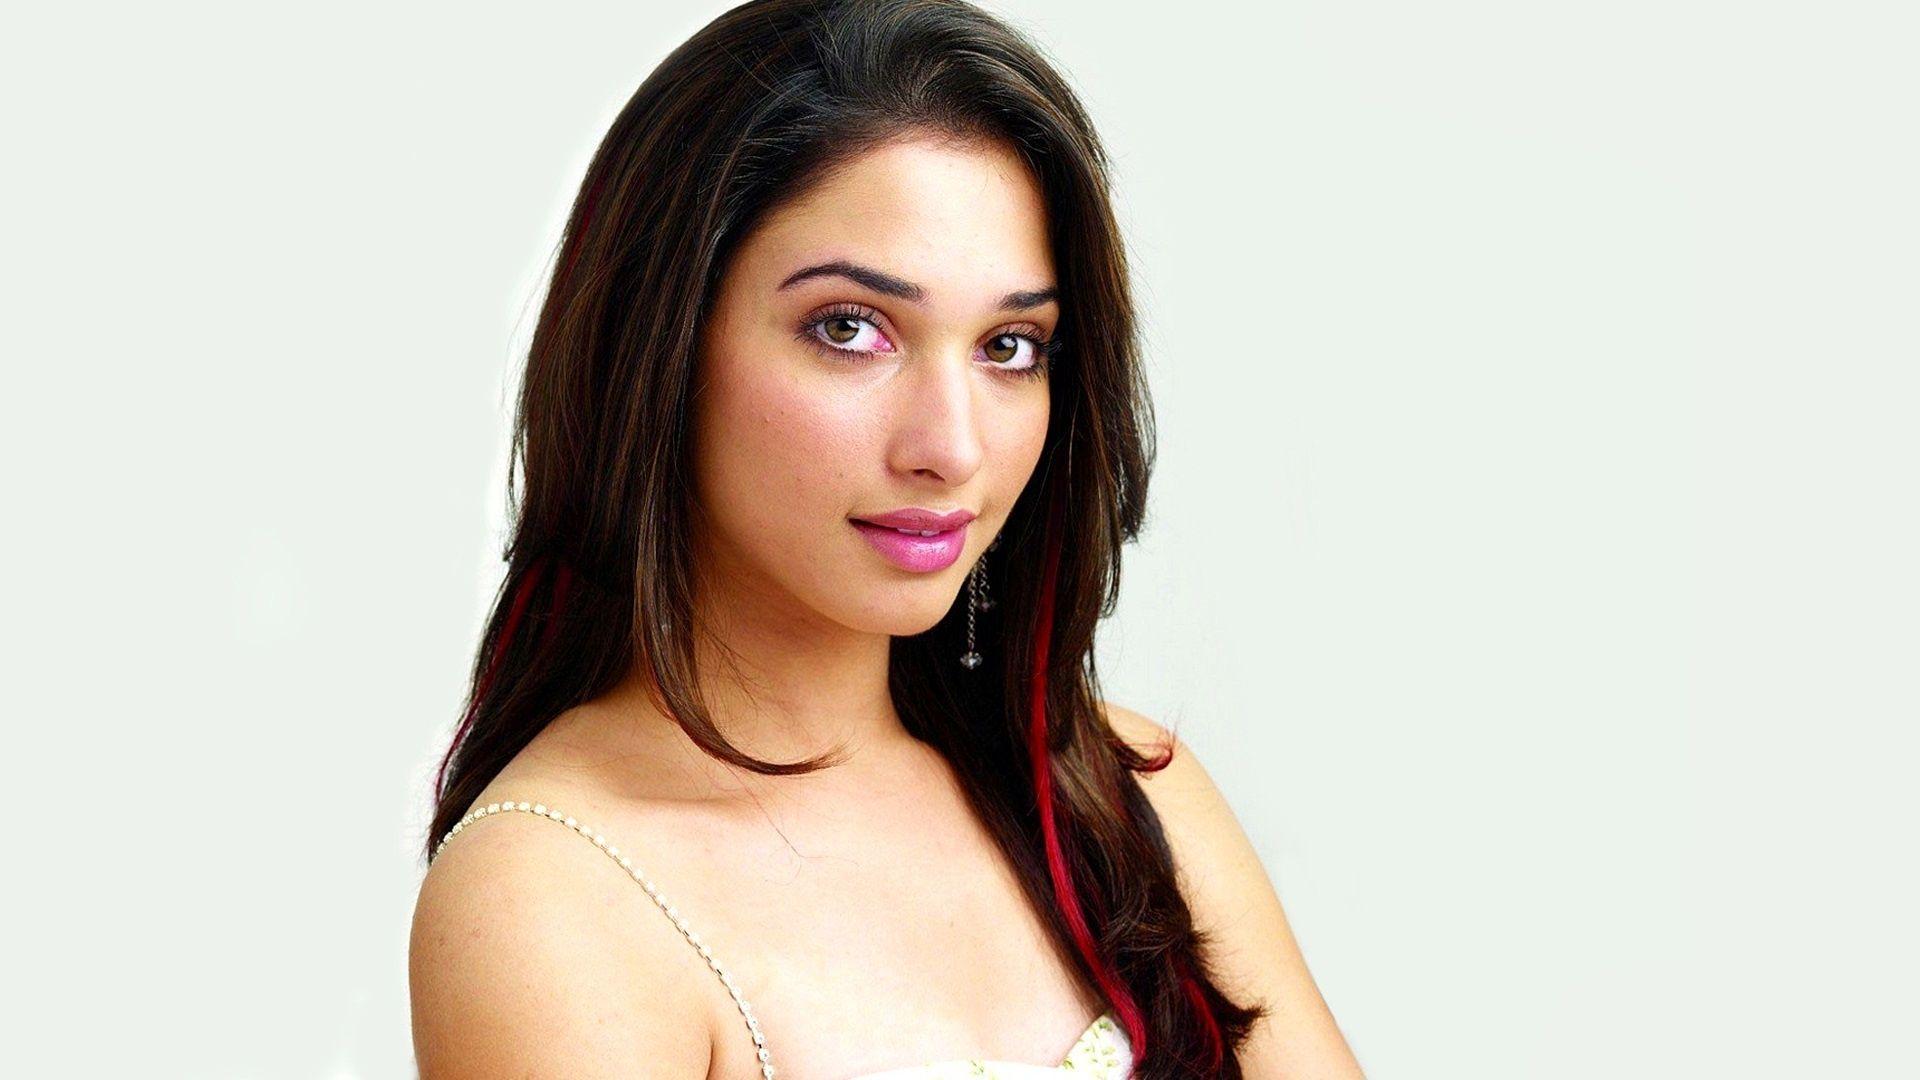 Tamanna South Actress Wallpaper in jpg format for free download